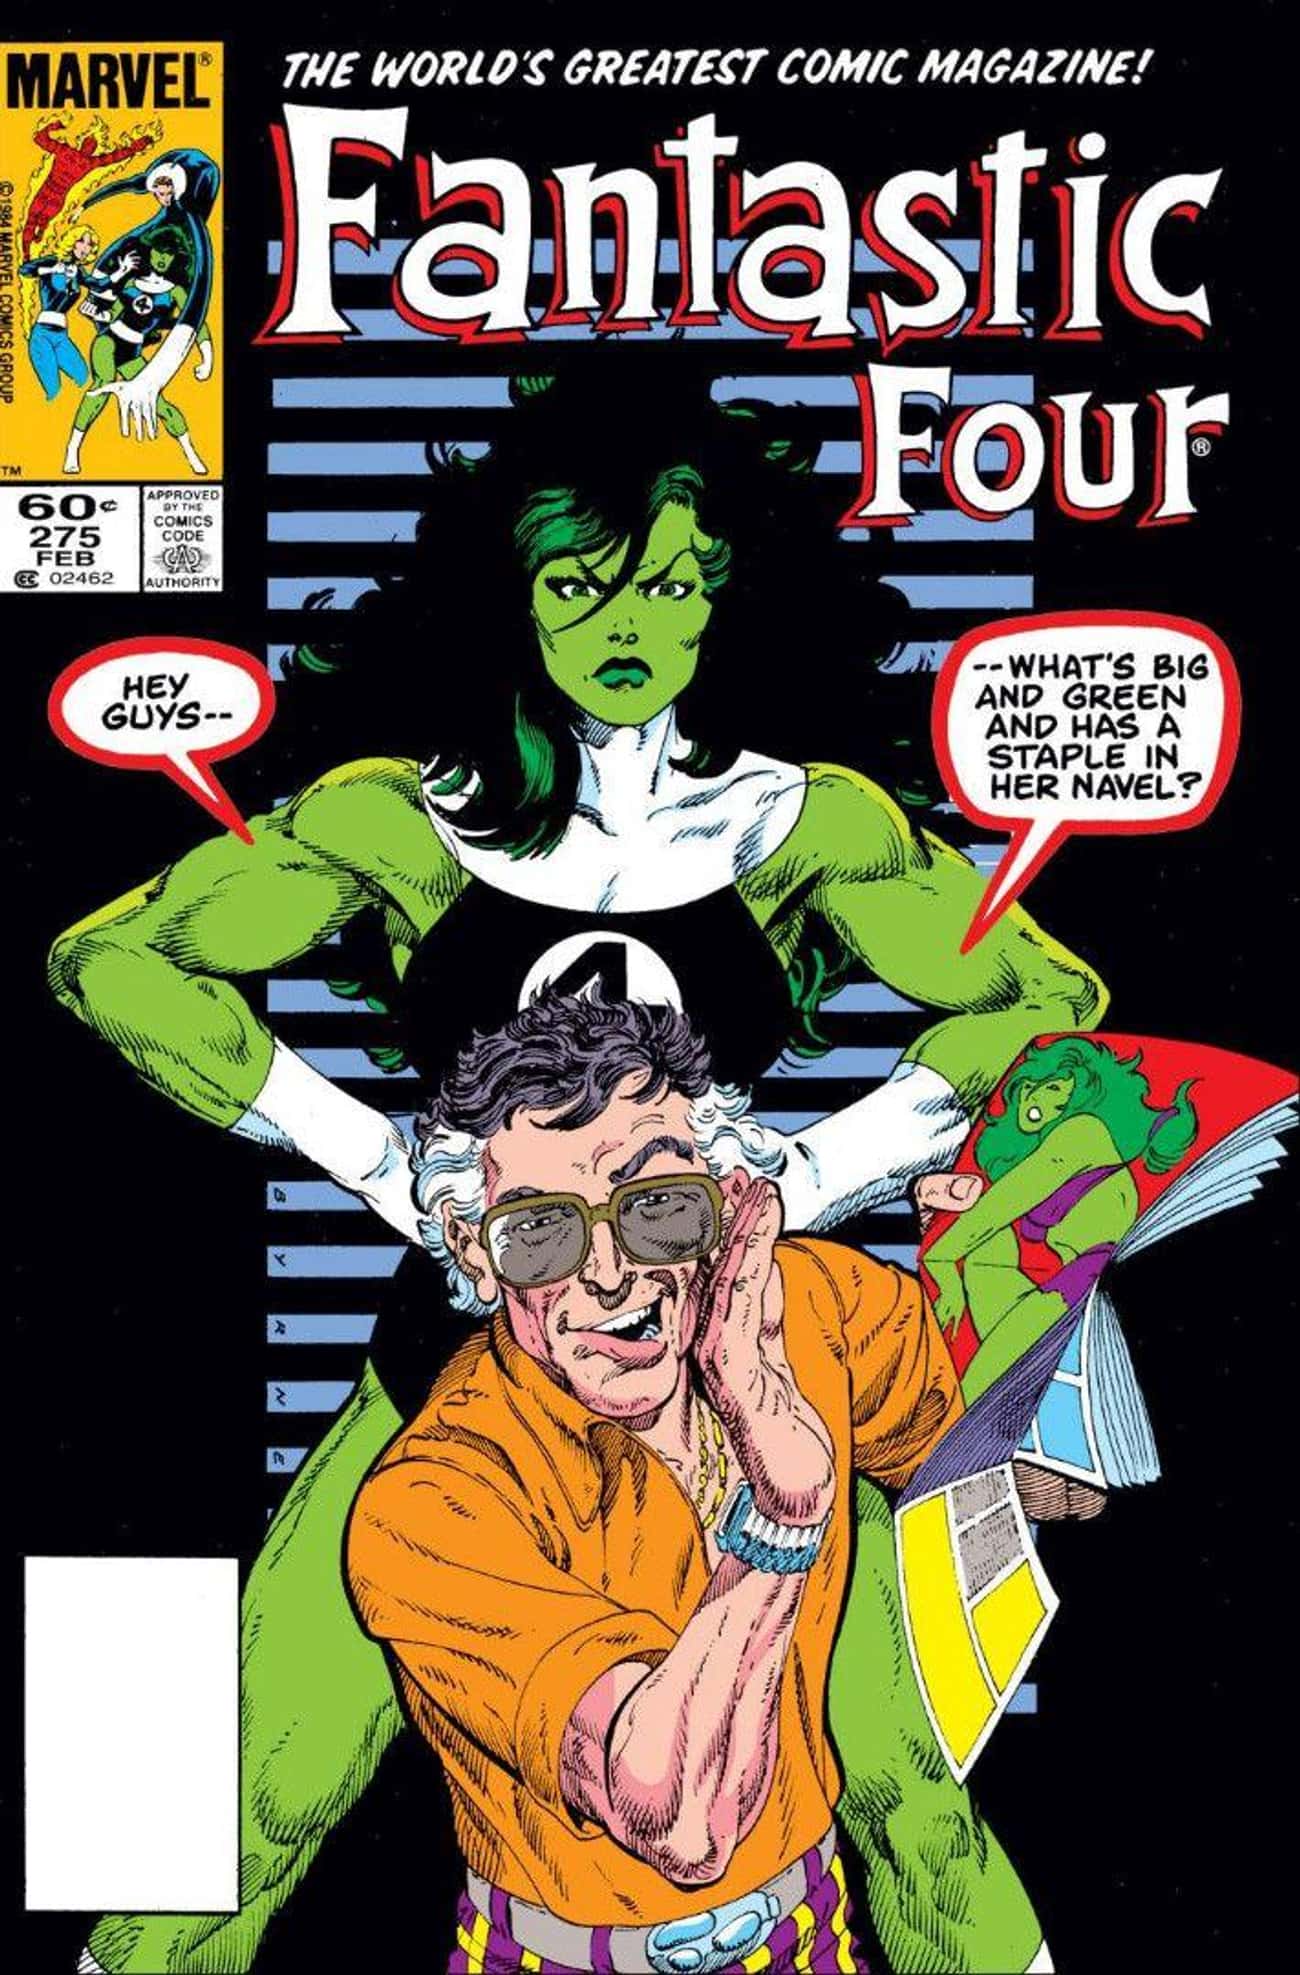 Sensuality And Sexism Have Always Been Major Components Of She-Hulk's Story